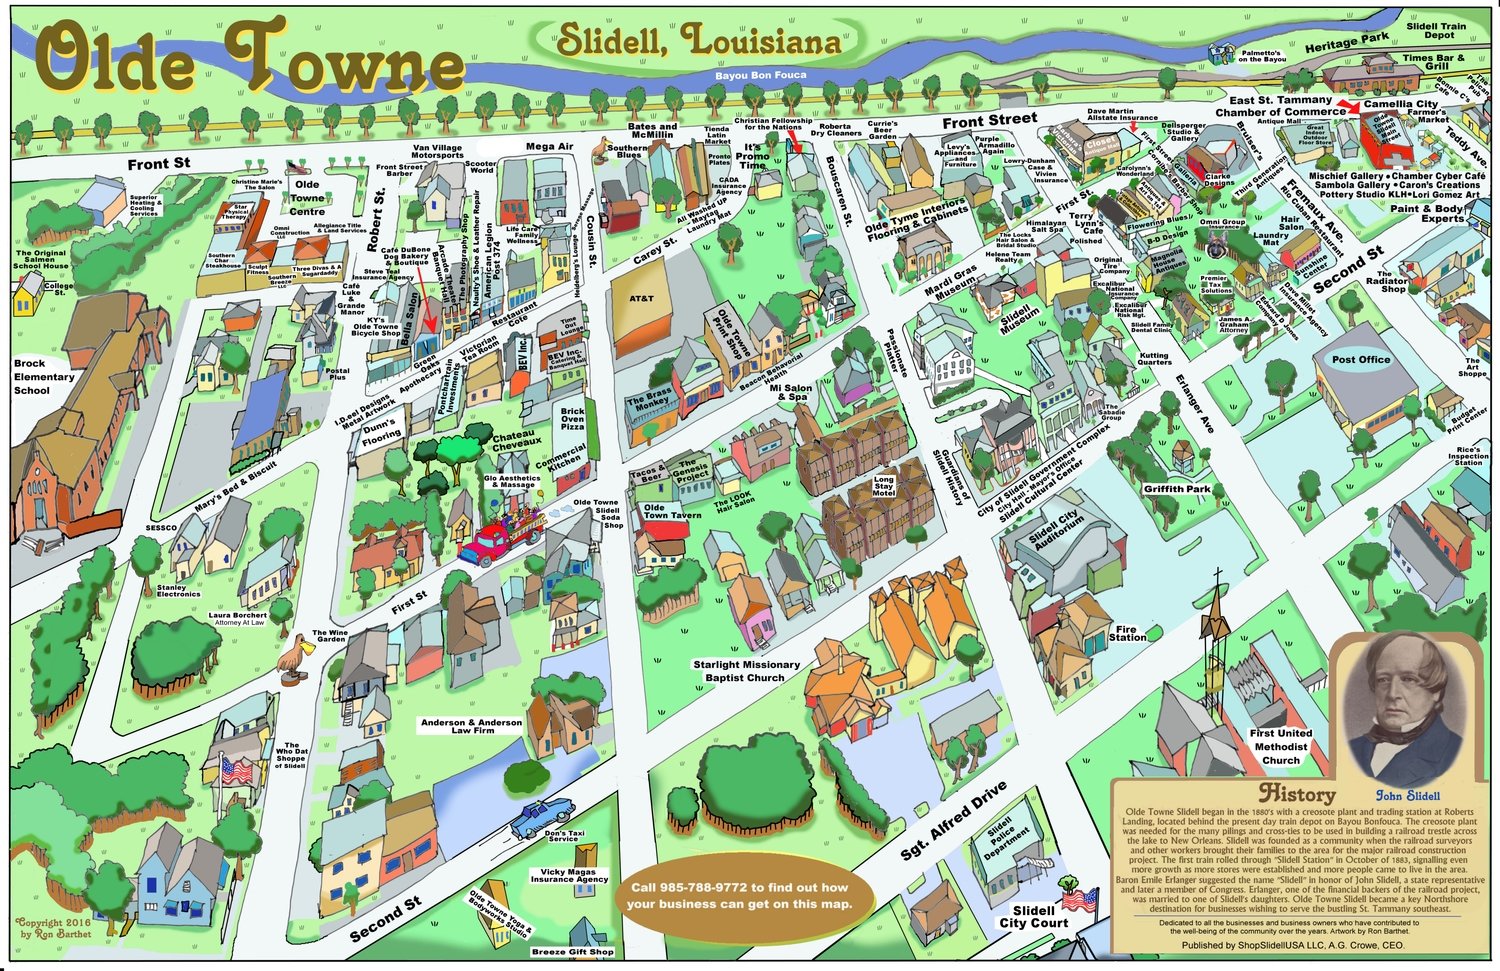 24" X 36" Full Color Caricature Rendering of Historic Olde Towne Slidell, LA